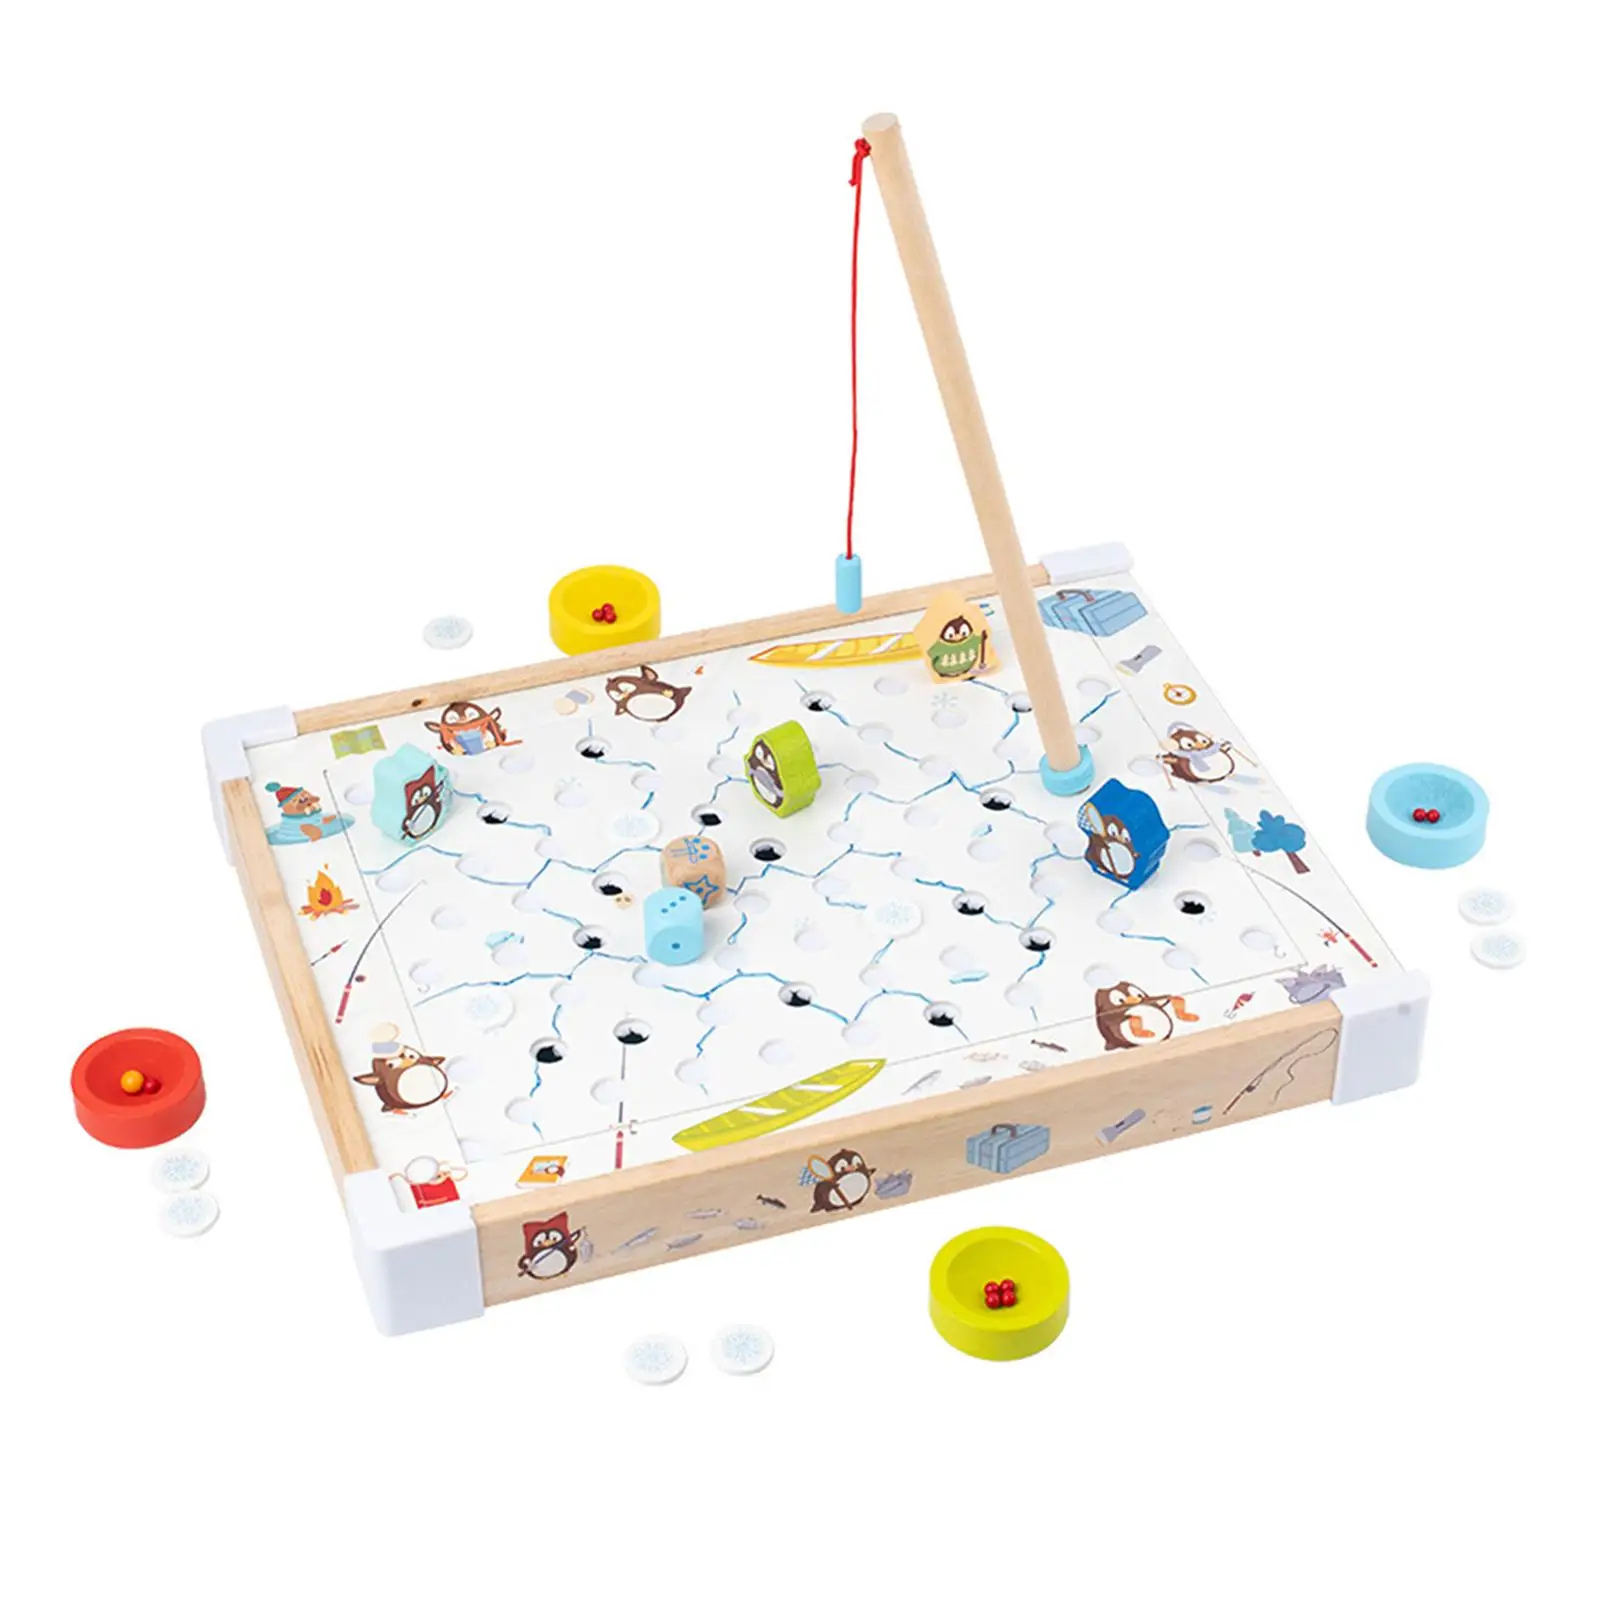 Fishing Toy Party Favors Teaching Aid Preschool Learning Educational Toy Board Game for Children Girls Boys Kids Birthday Gifts